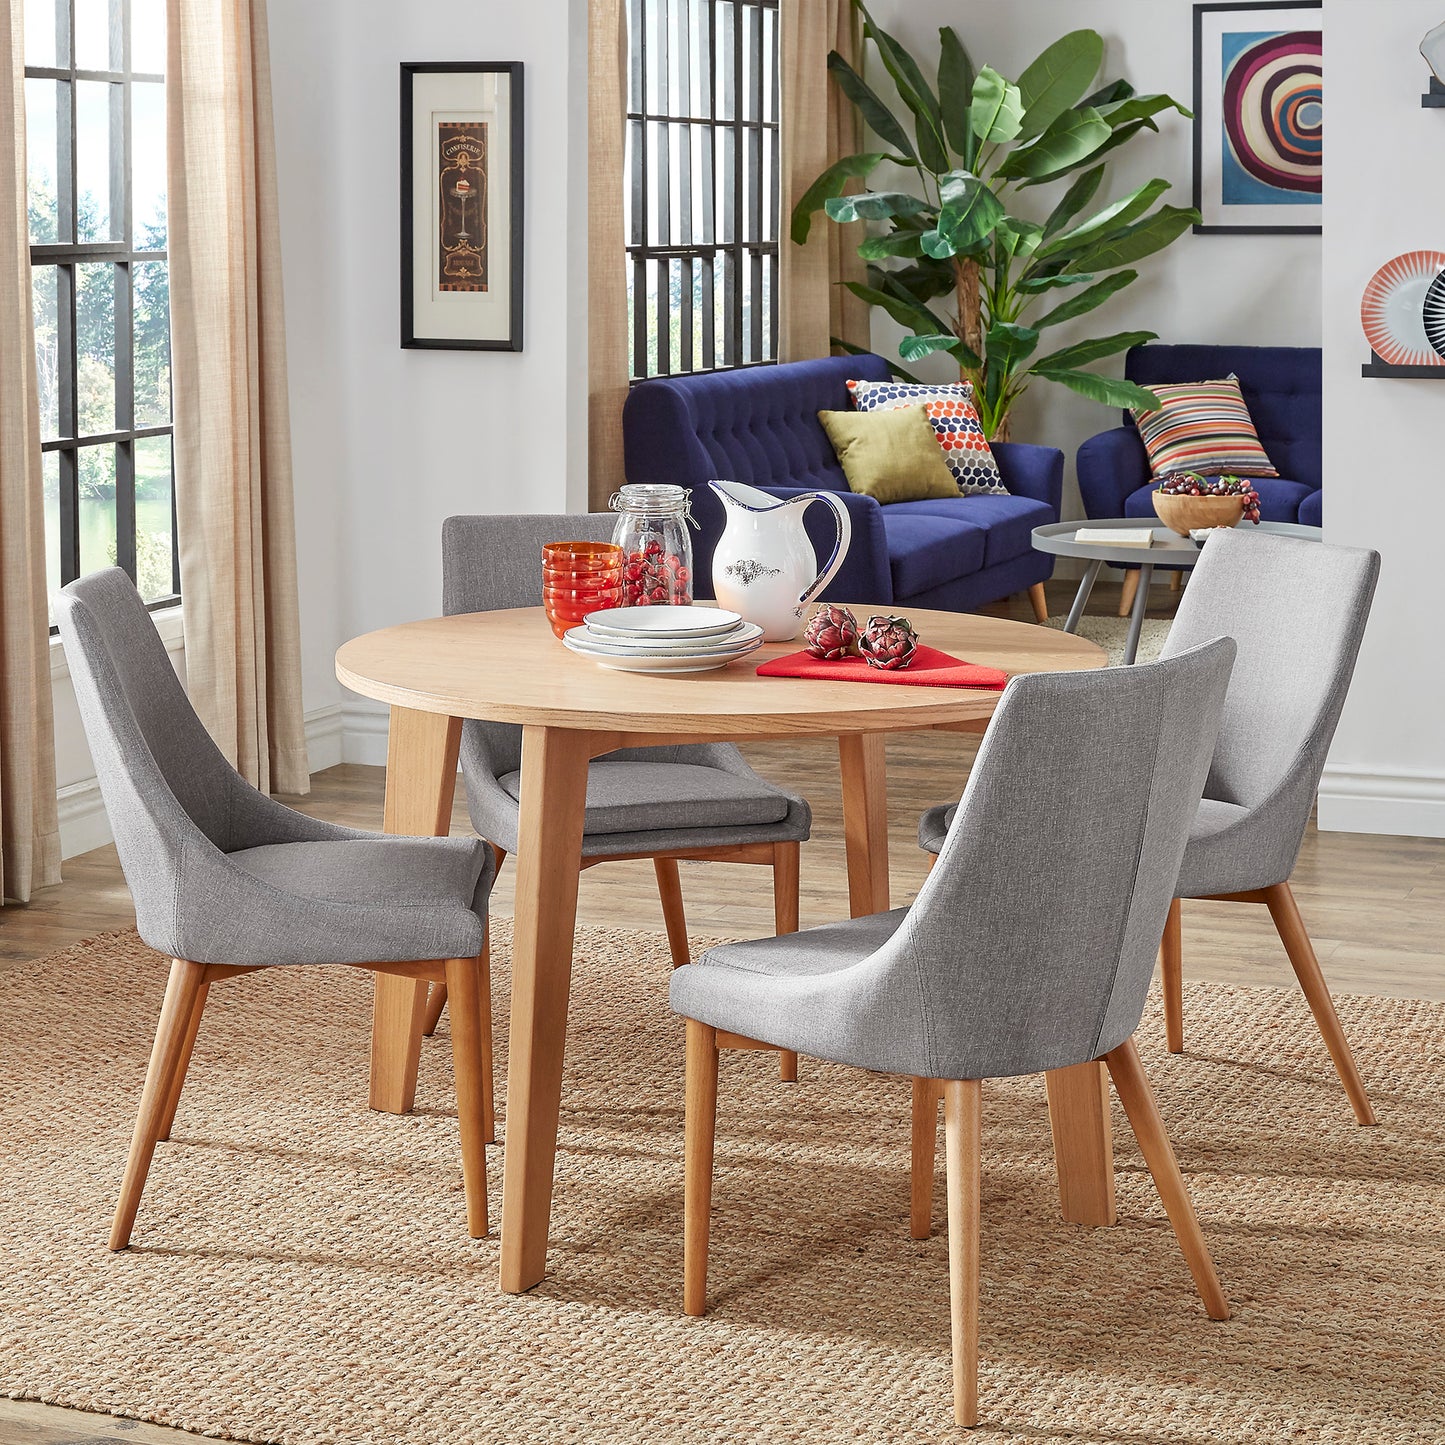 Round Dining Table Set - Light Oak Table, Grey Linen Chairs, 5-piece